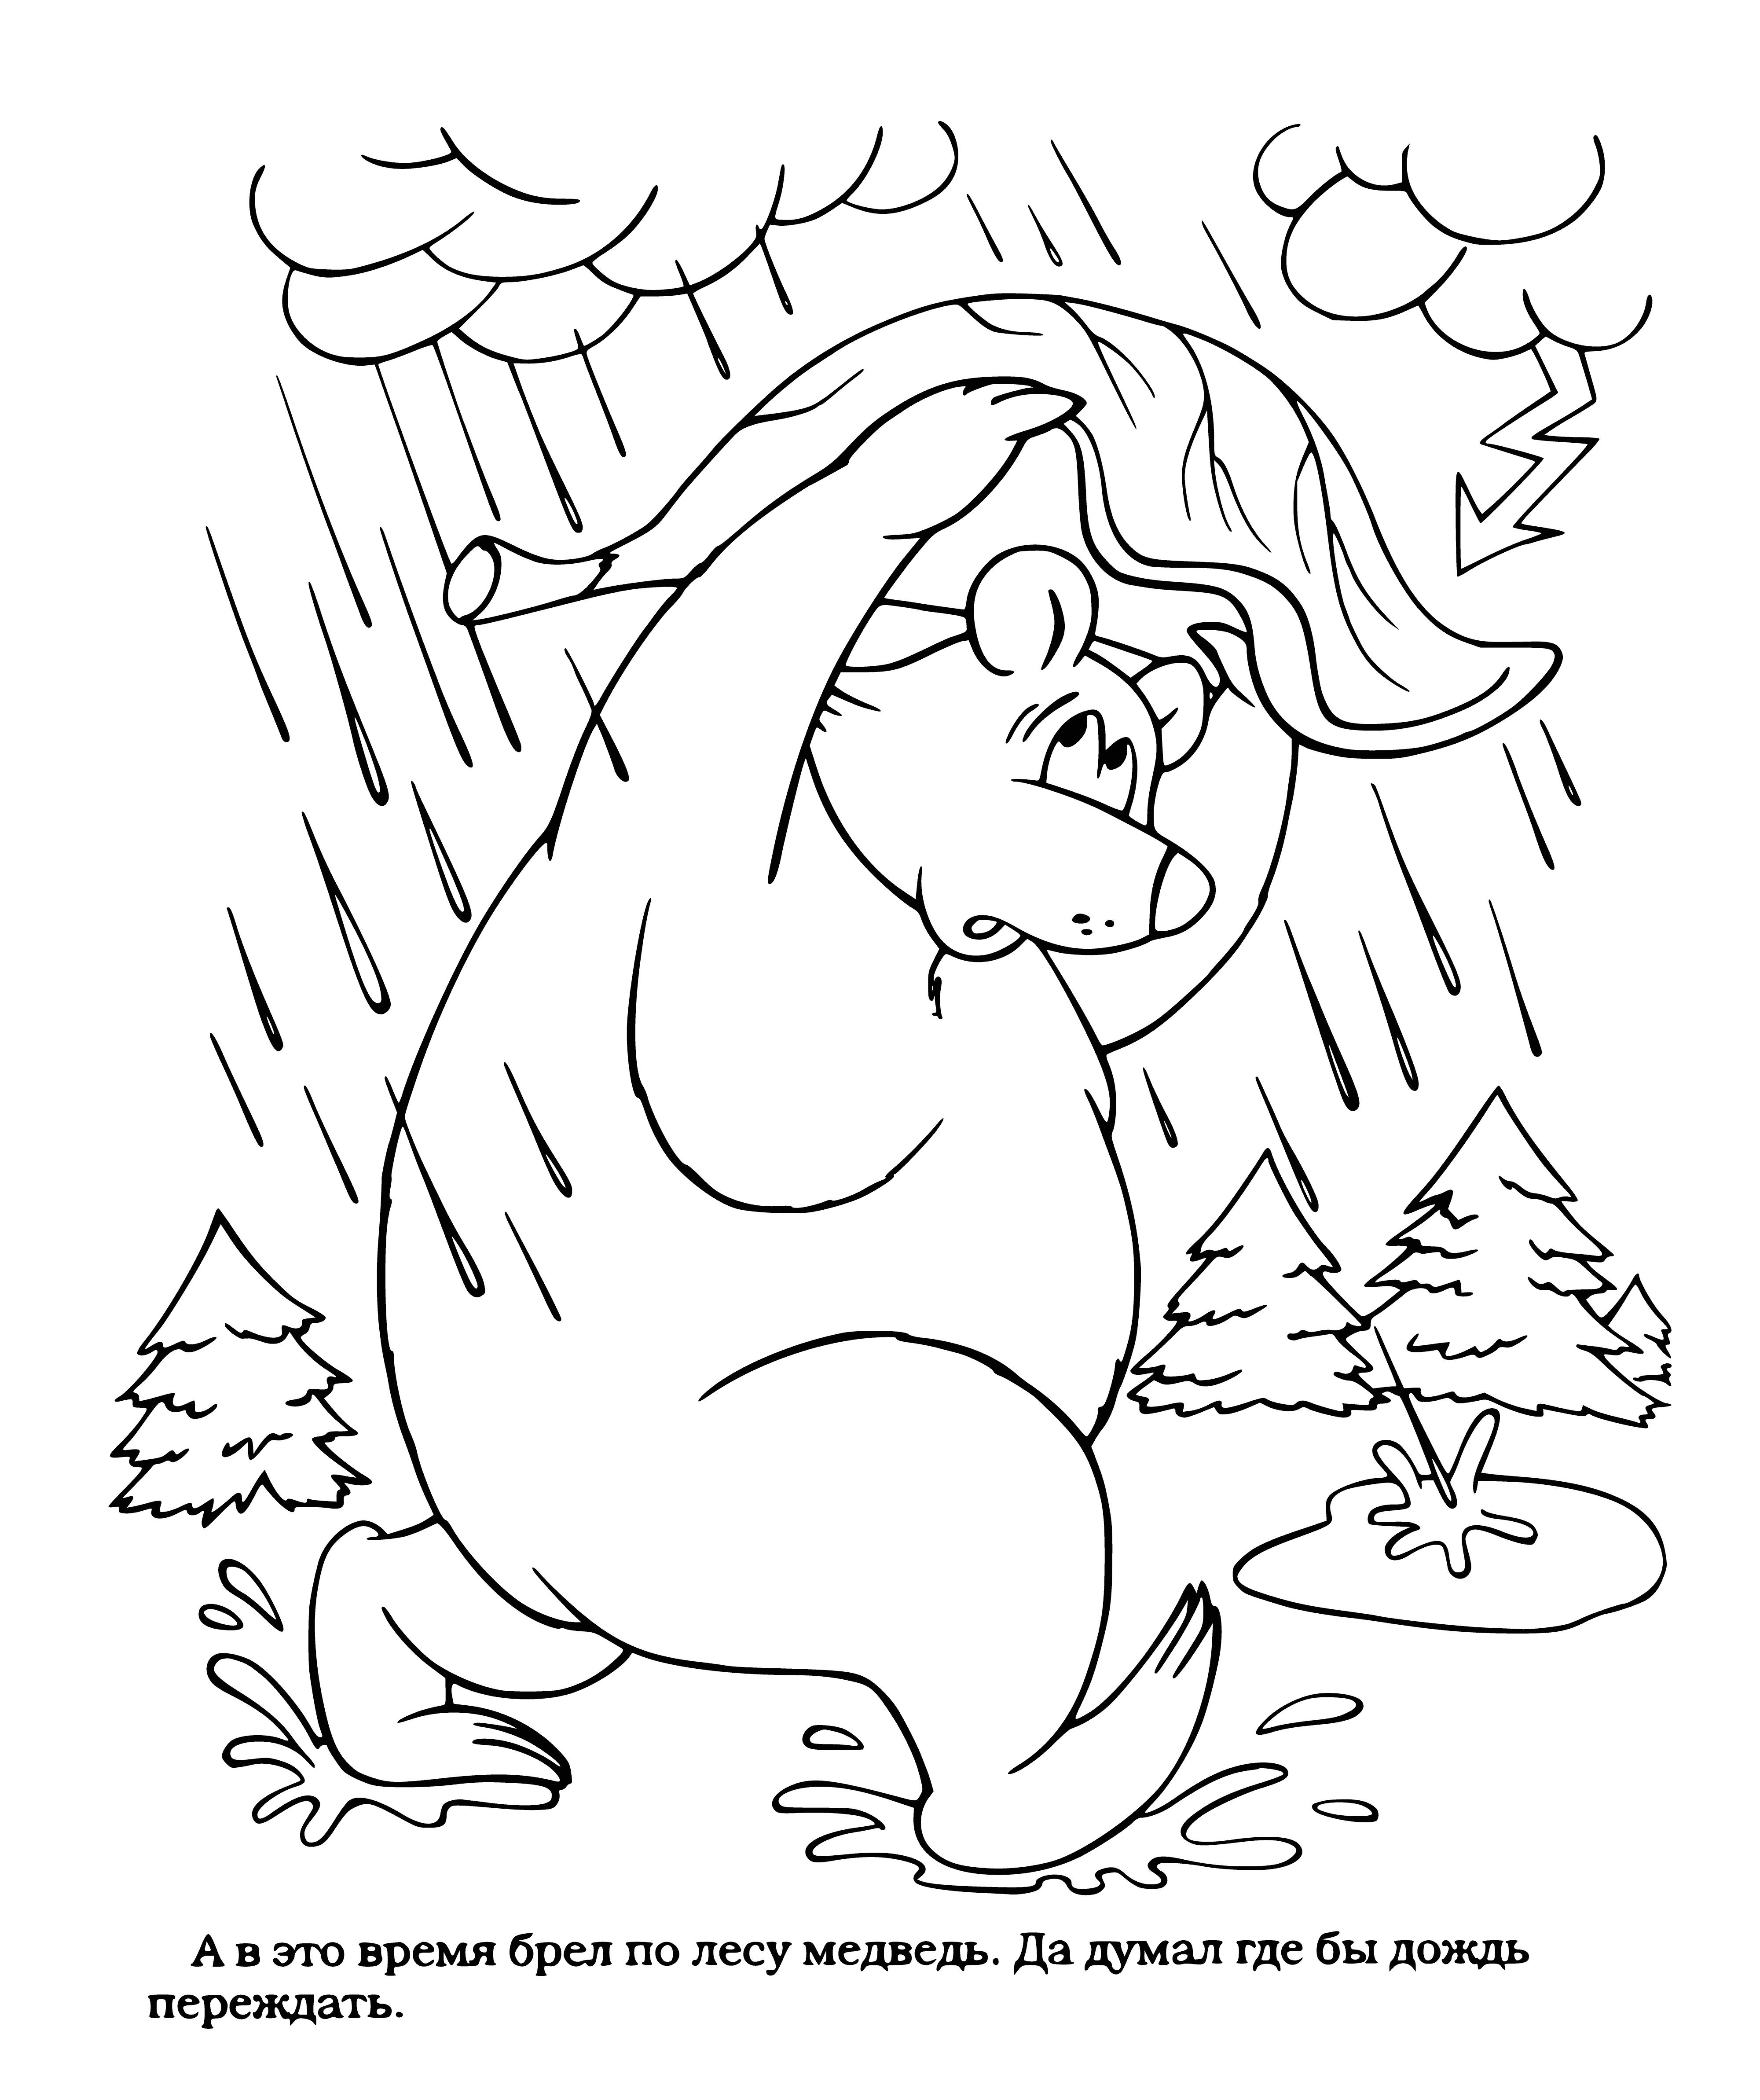 Teddy bear in the rain coloring page